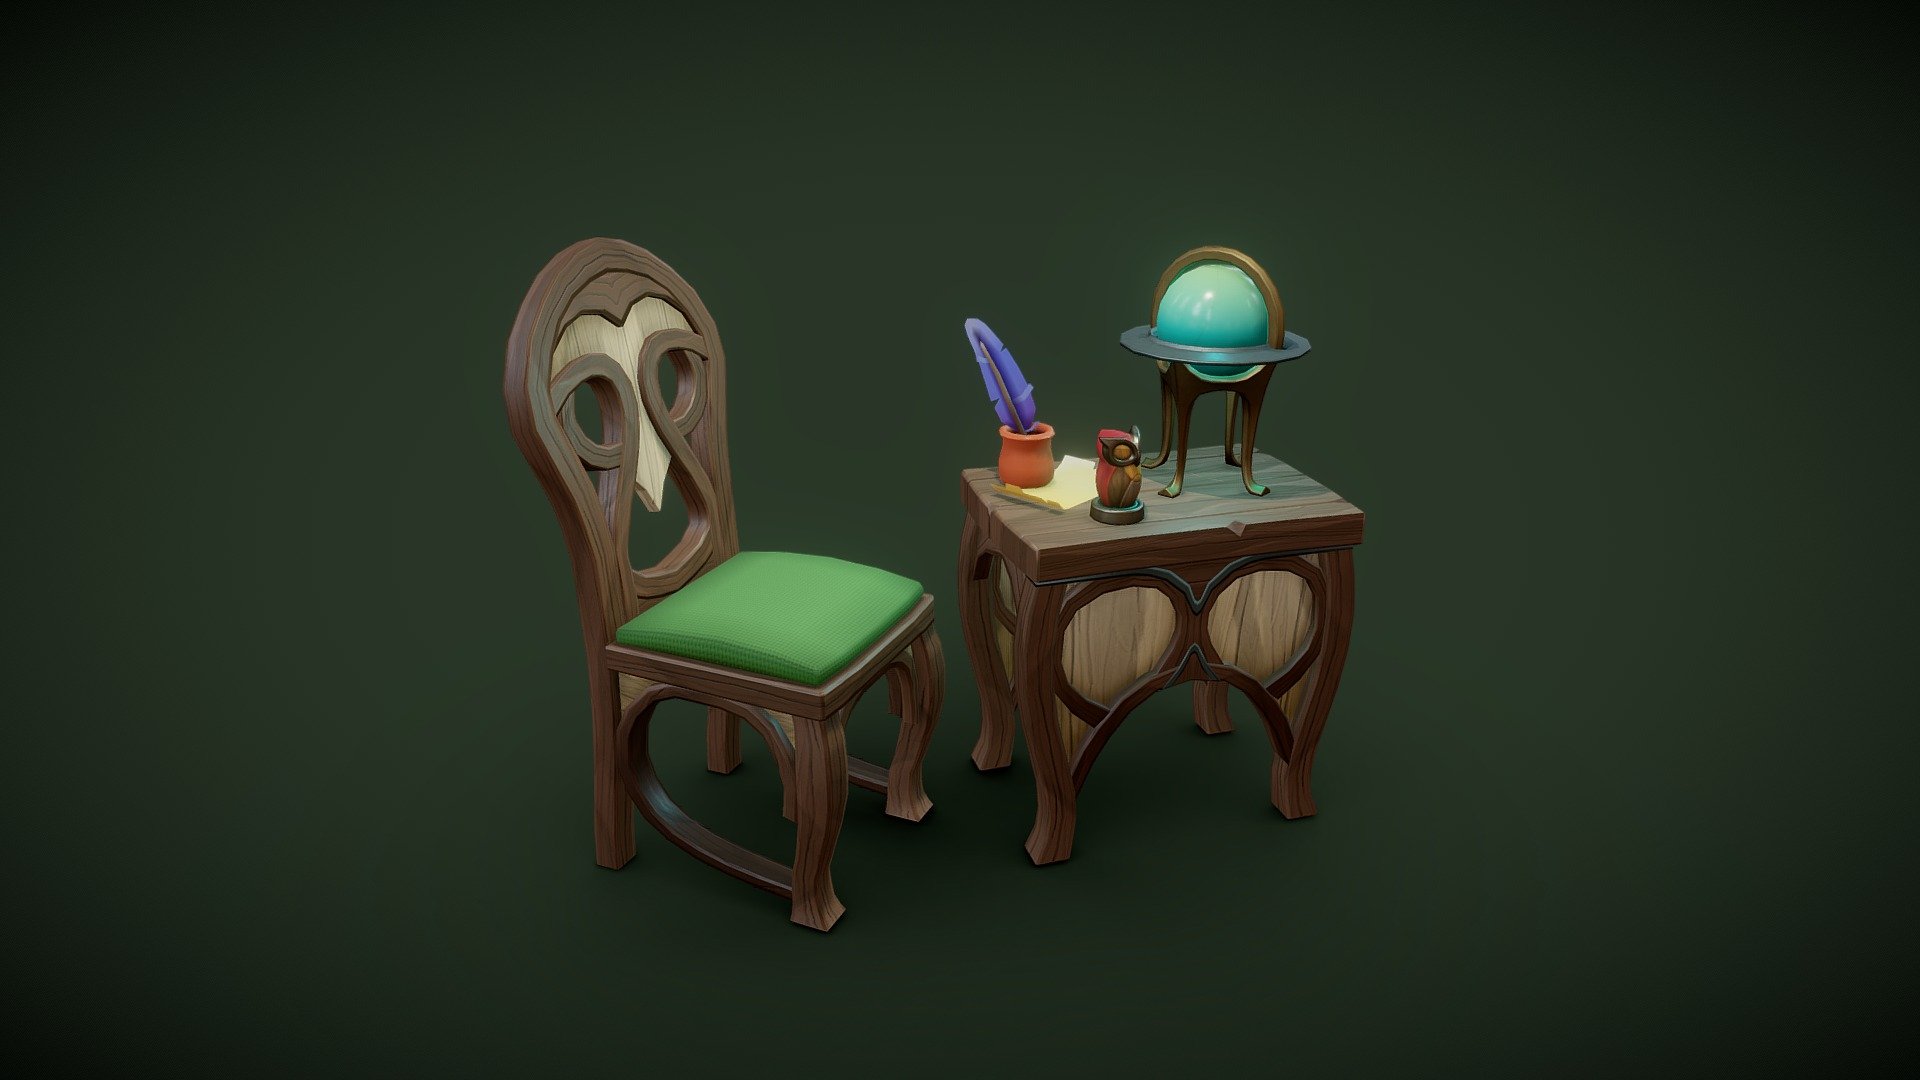 A short project practising use of trim sheets, based on the awsome design by Victor Maillet, for bi-monthly environment art challenge on polycount, - Owl Furniture - 3D model by plasmaernst 3d model